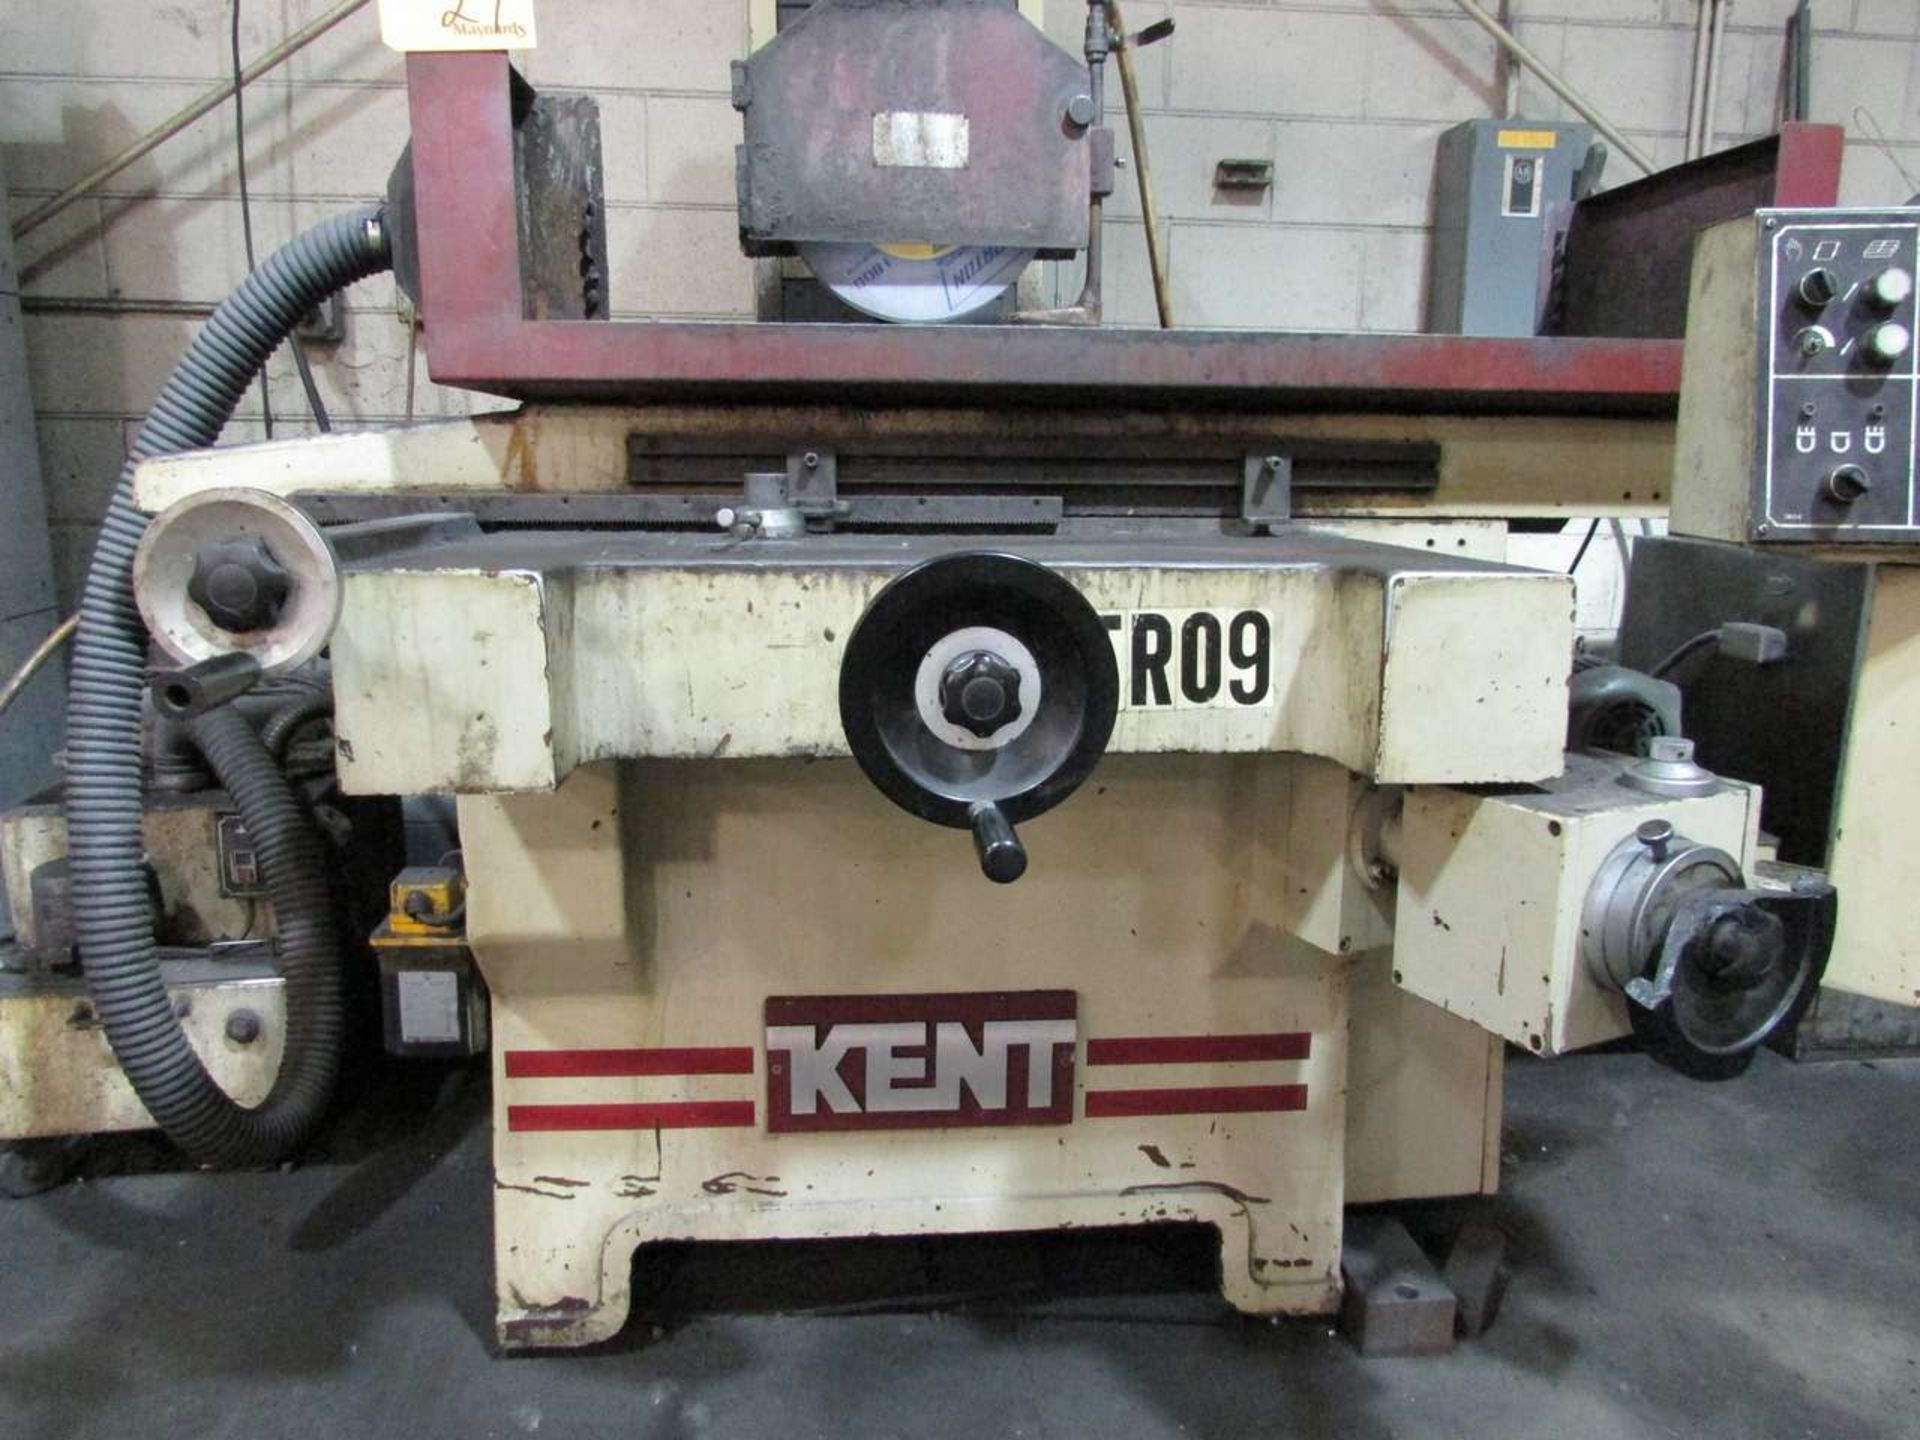 1987 Kent KGS-360AHD Surface Grinder - Image 6 of 12